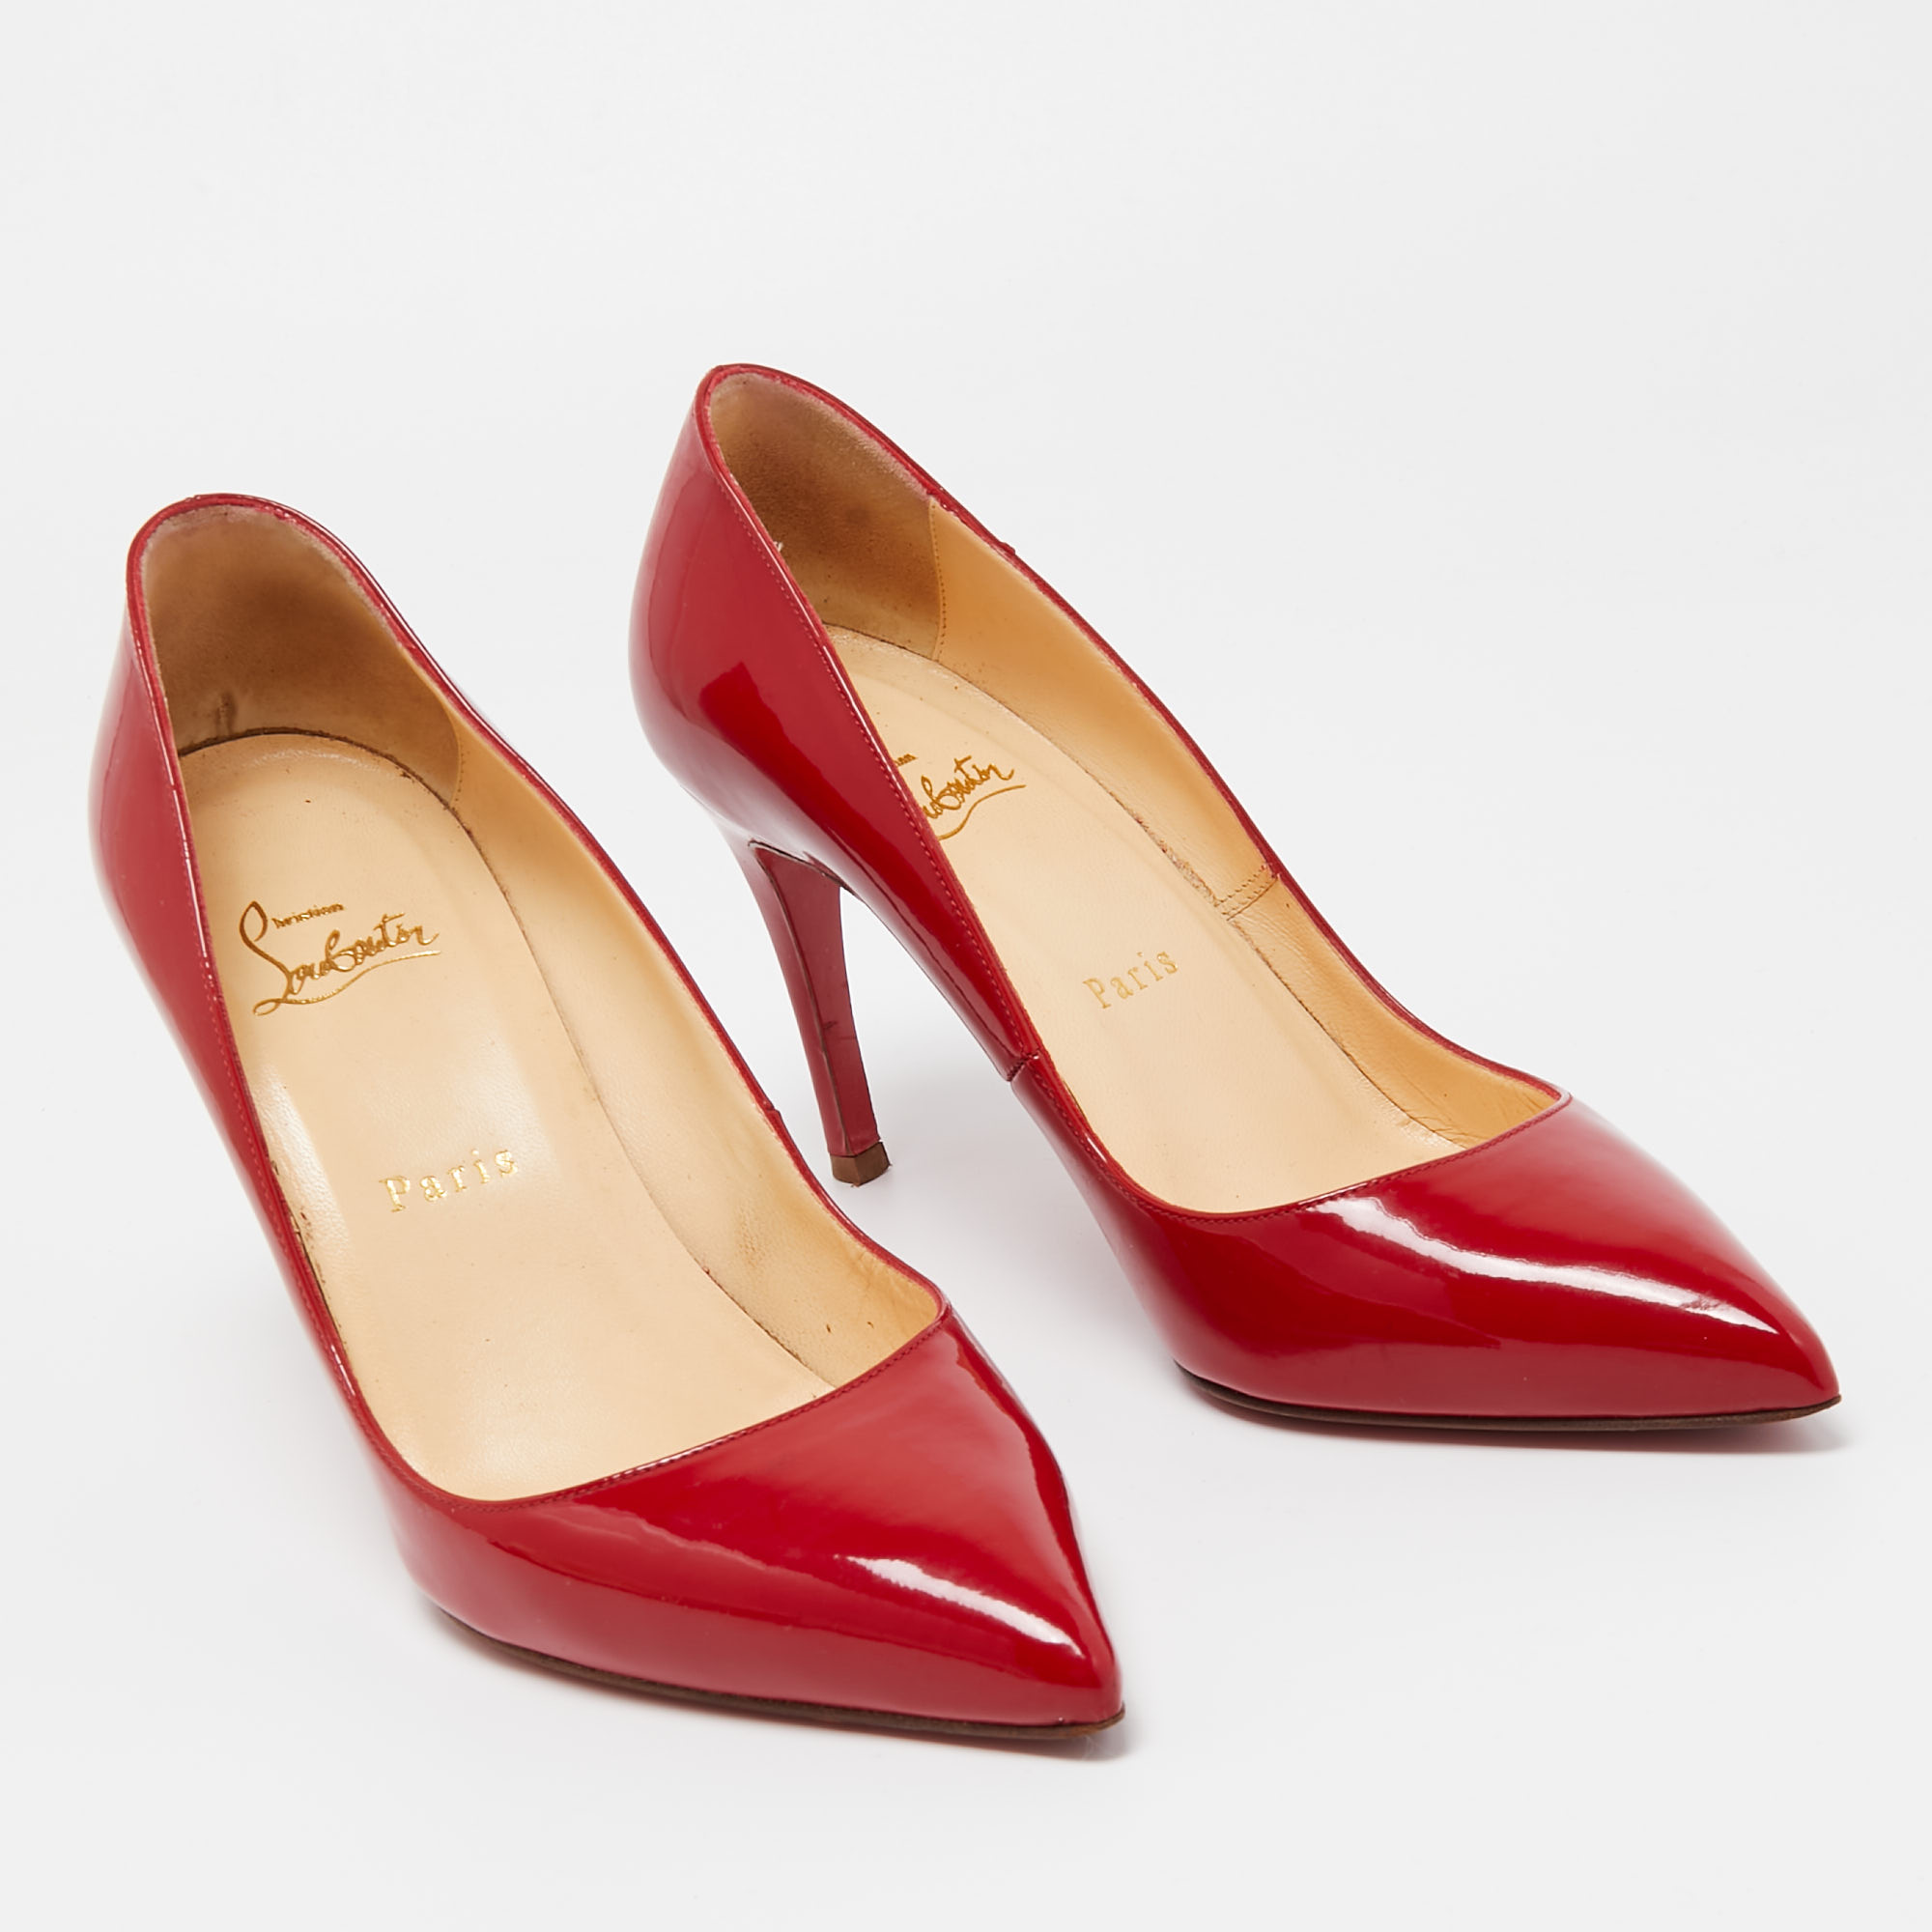 Christian Louboutin Red Patent Leather Pigalle Pointed Toe Pumps Size 38